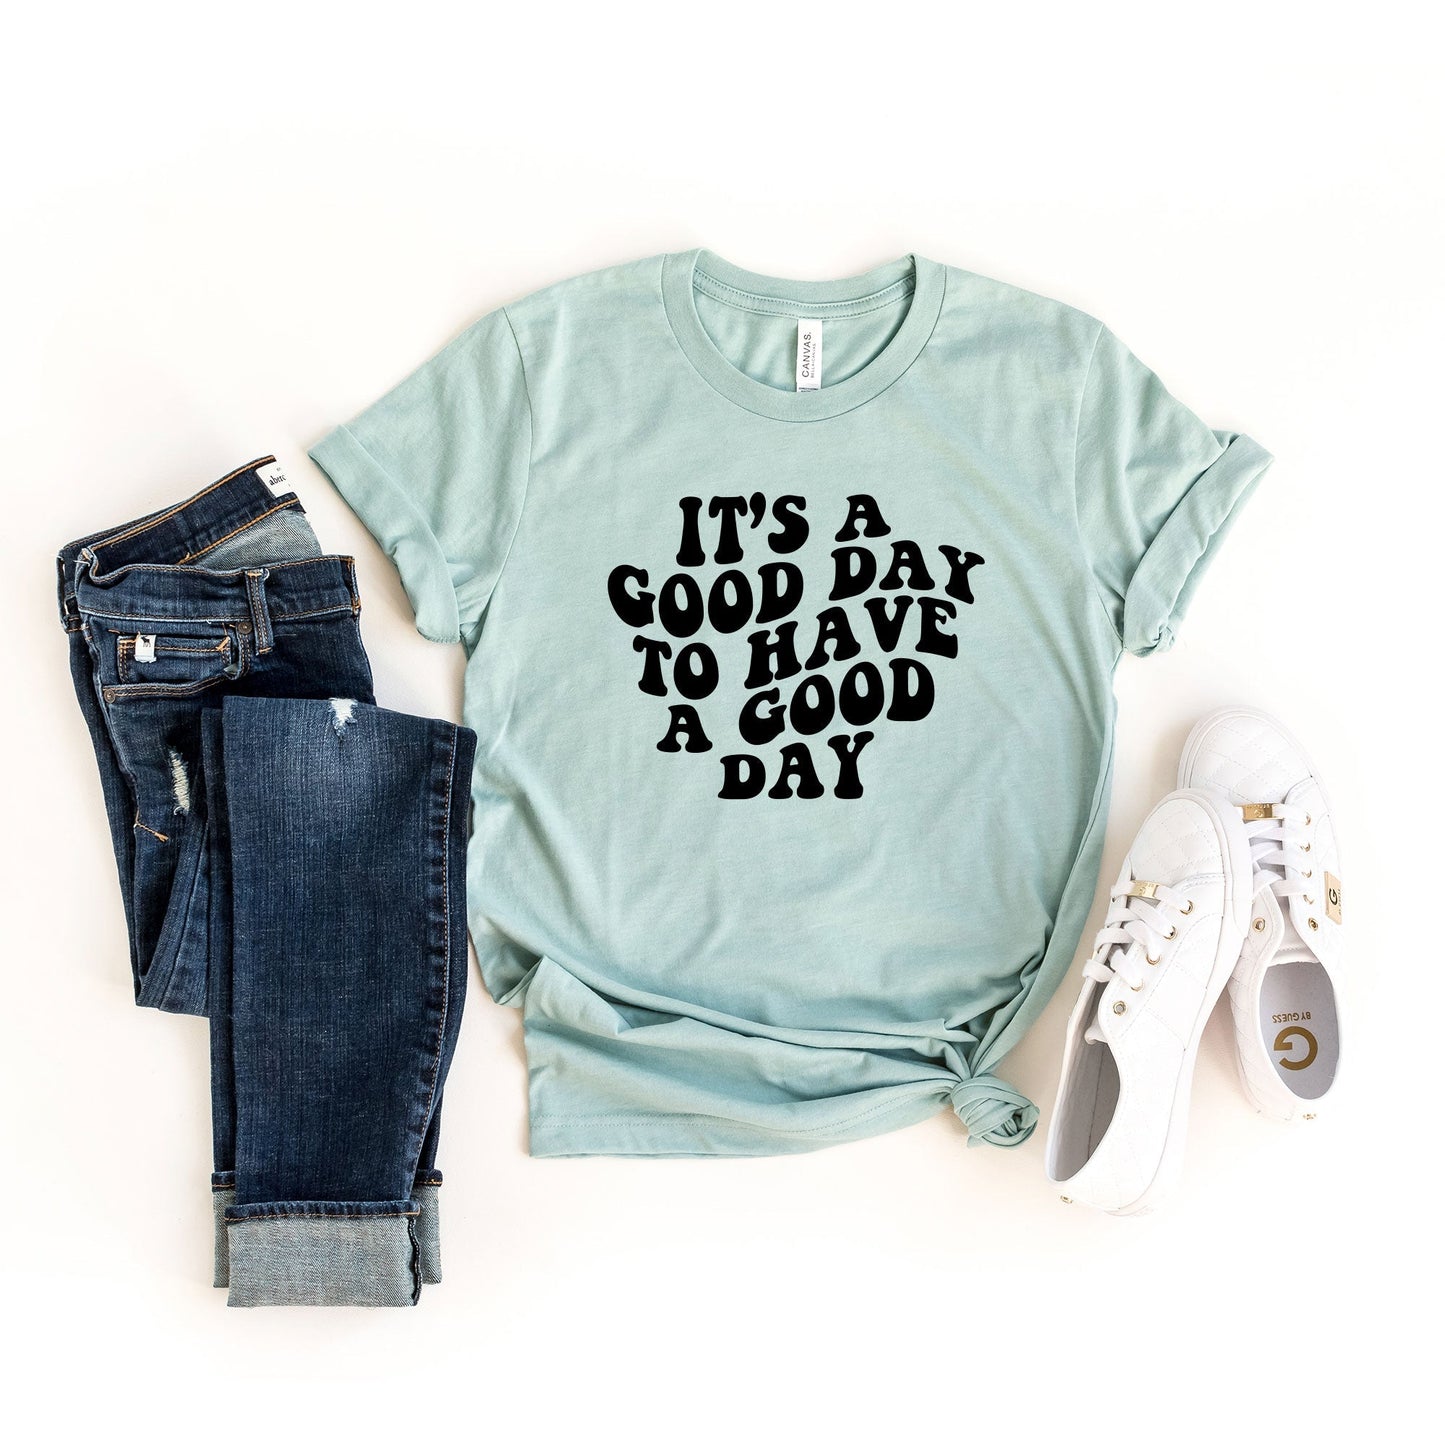 It's A Good Day To Have A Good Day | Short Sleeve Crew Neck